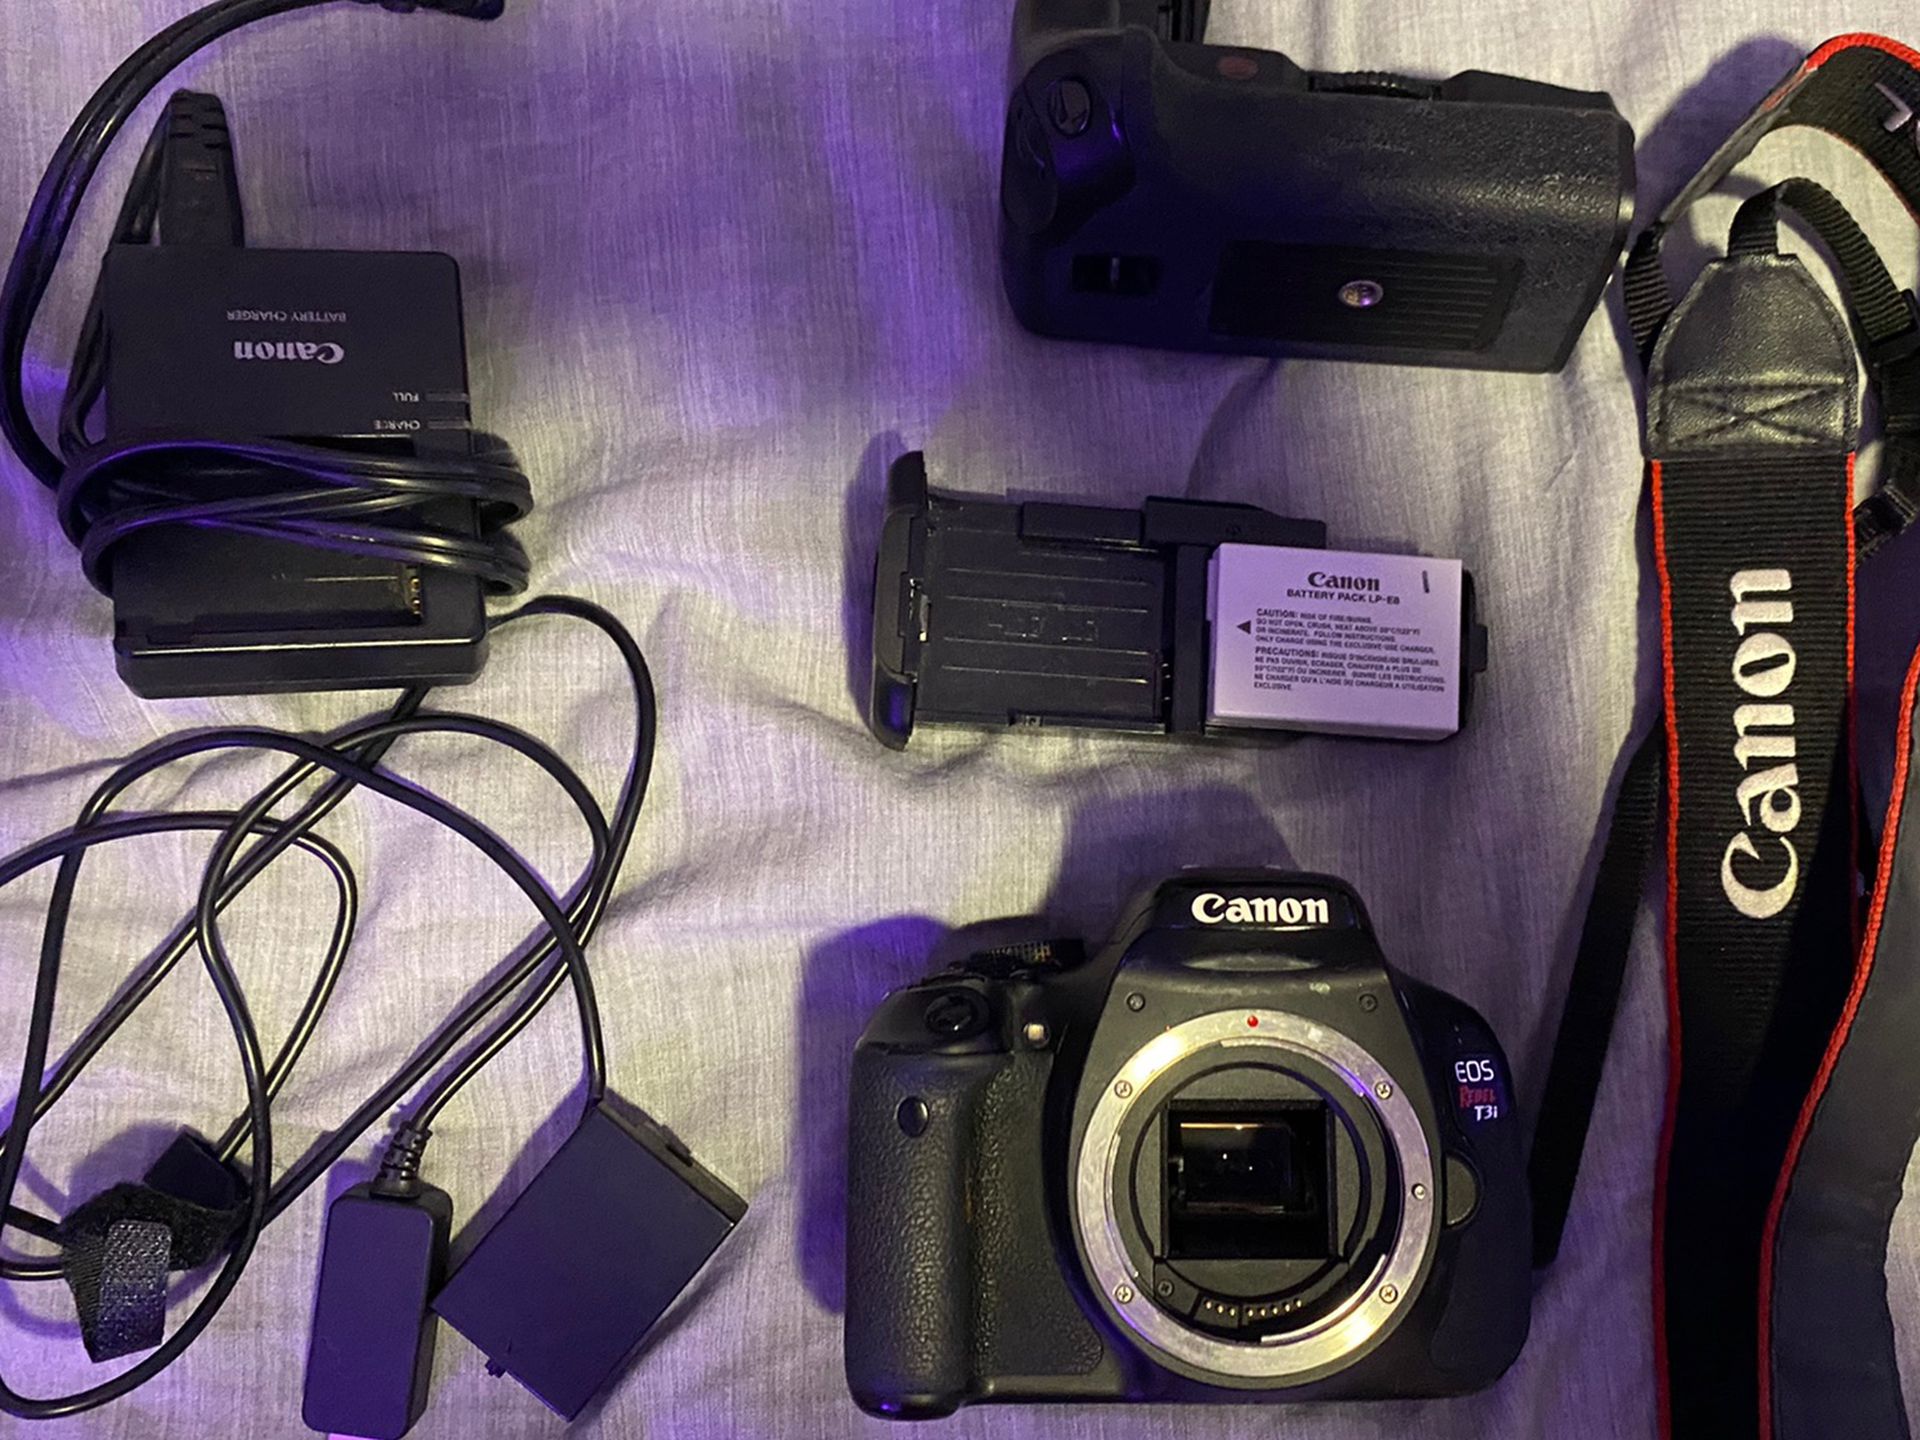 CANON T3I - SELLING AS IS CONDITION